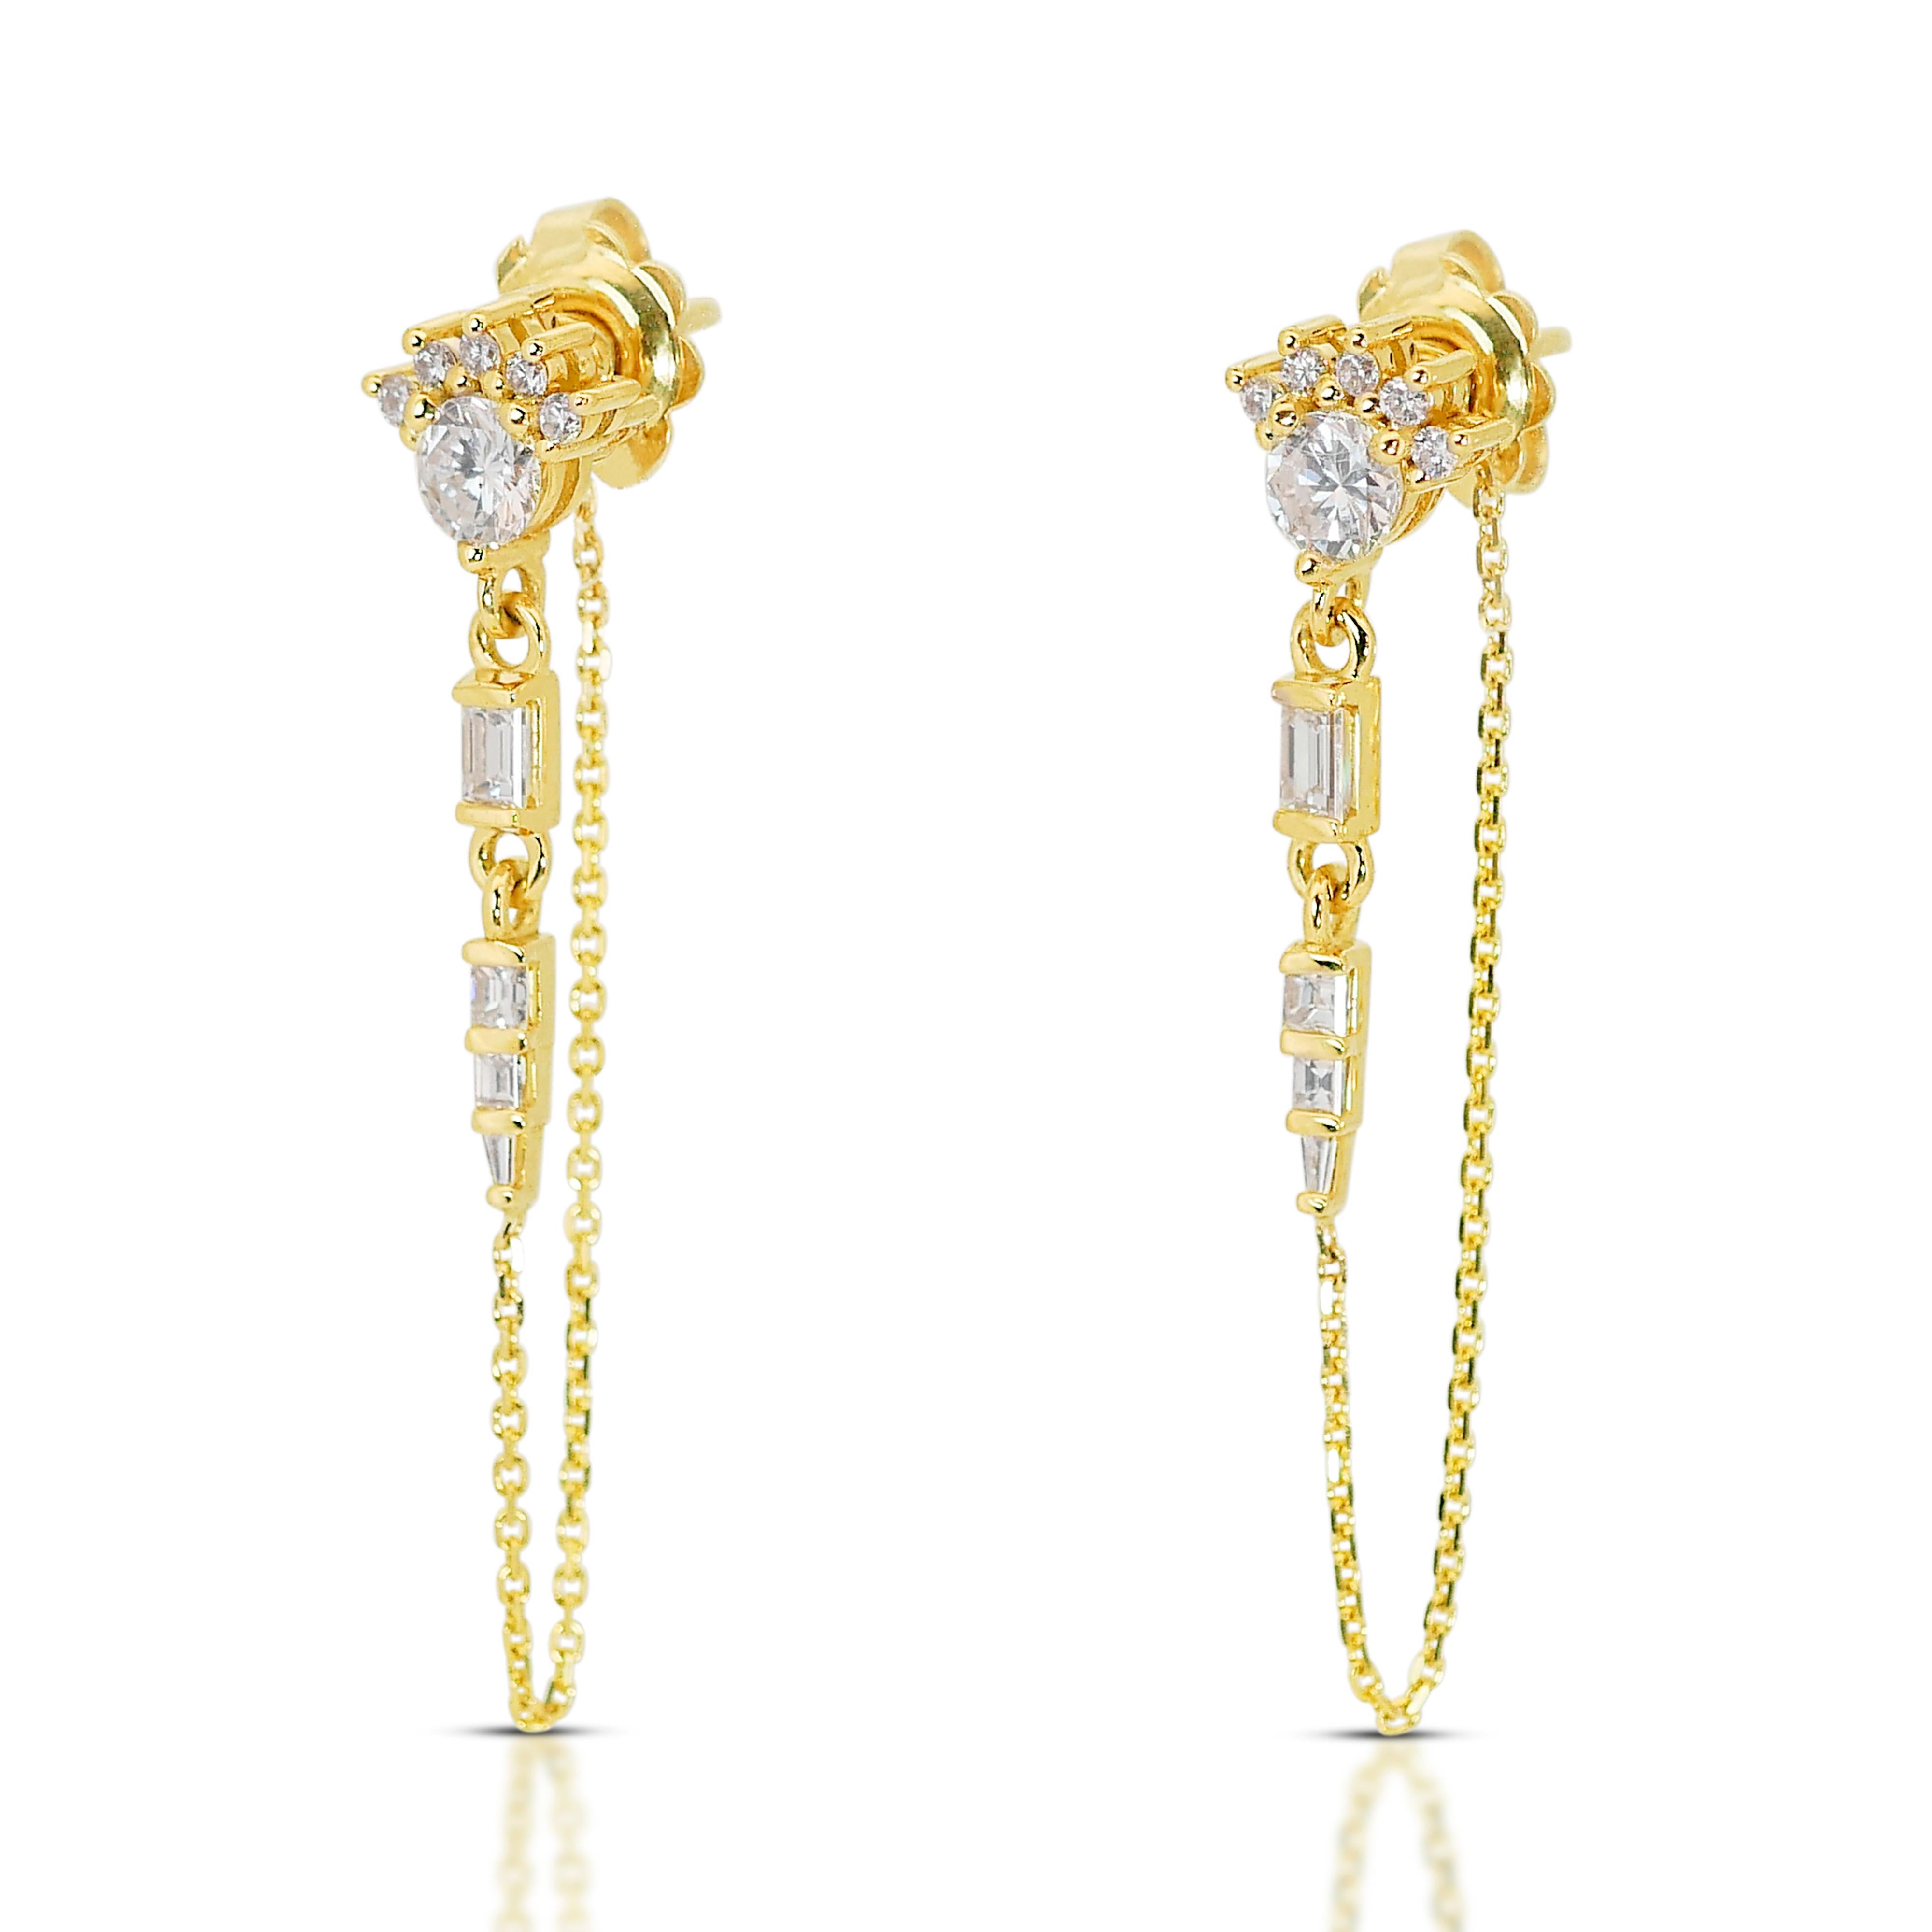 Round Cut Fascinating 18K Yellow Gold Diamond Drop Earrings with 1.19ct - IGI Certified For Sale